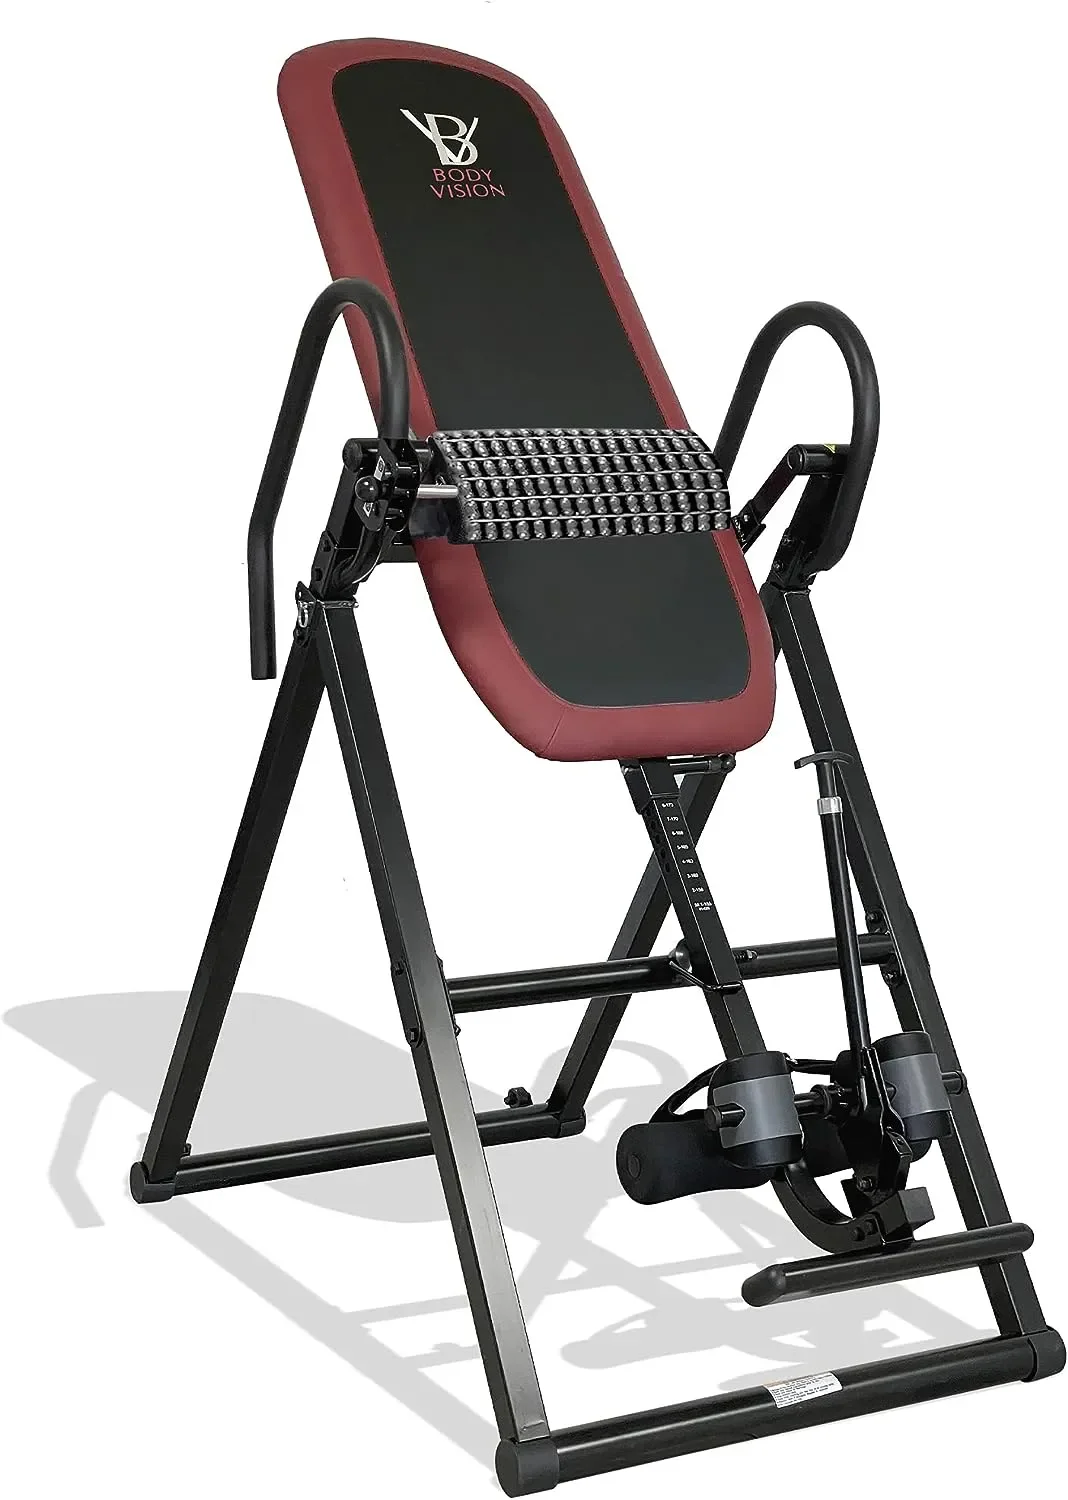 

XL 3.65 - Xtra Long, Xtra Wide Inversion Table with Patented Acupressure Back Massage Lumbar Pad, Patented Ankle Safety & Se